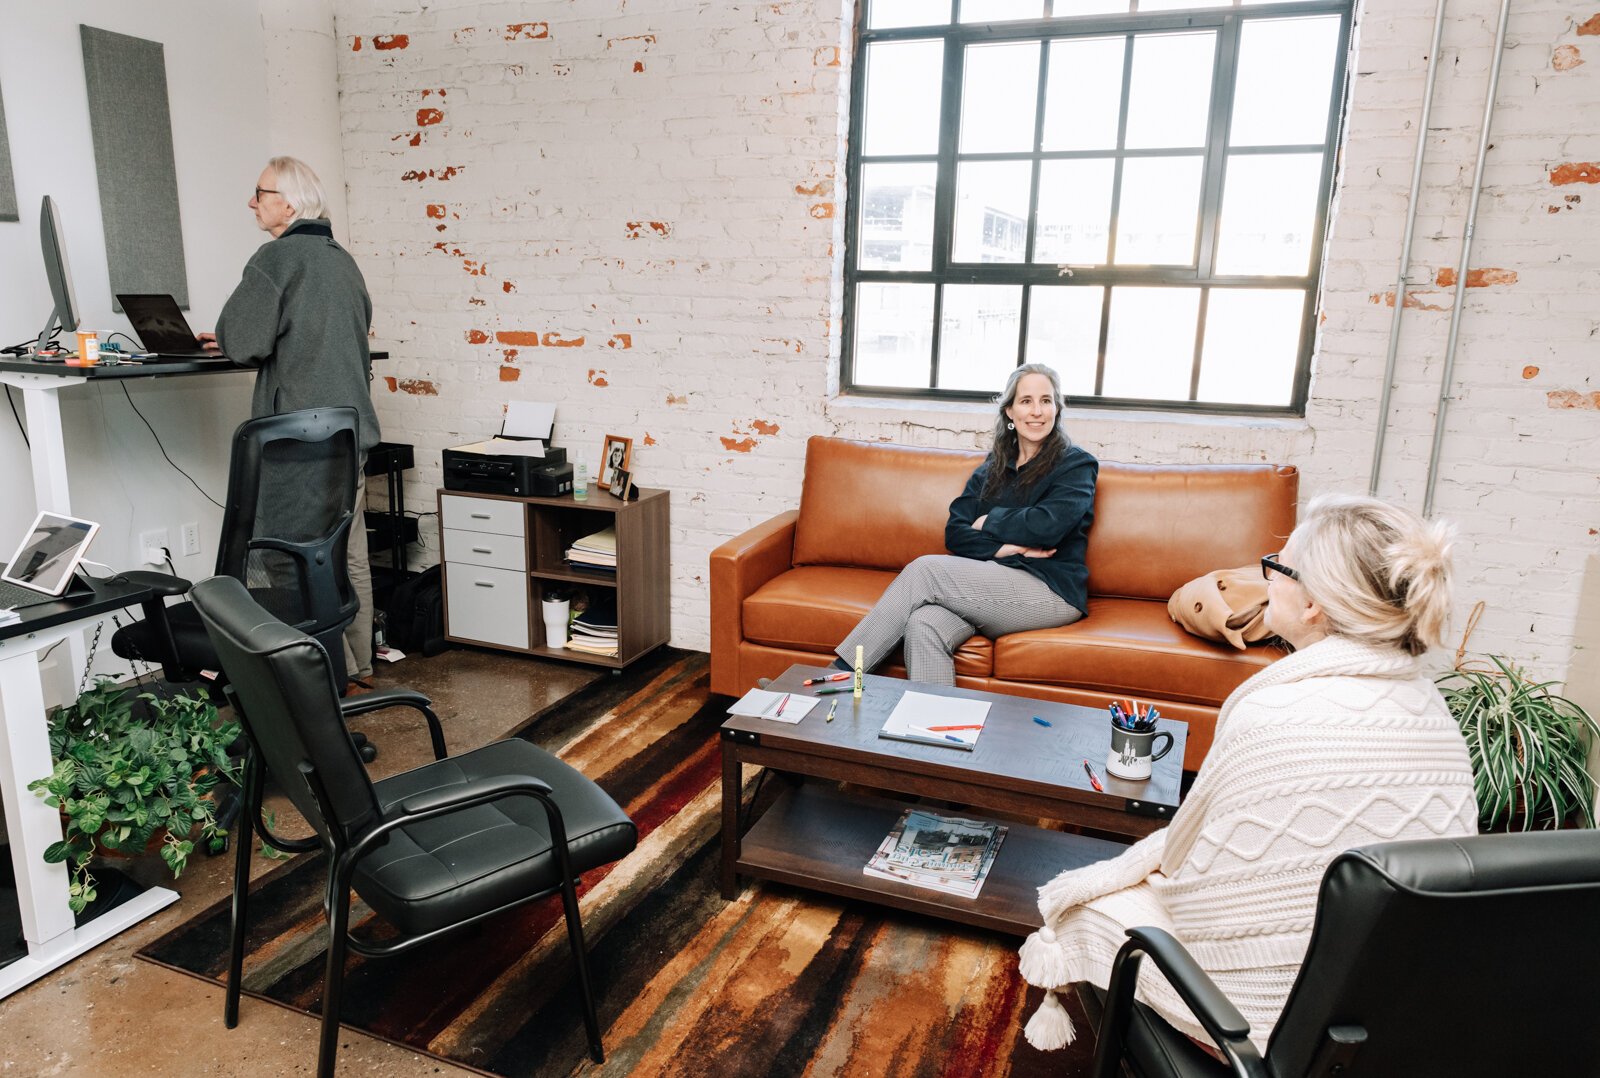 From left: Linda Valley, Debbie Lemmon, and Jeff Hartman with Master Consultants co work together in one of the offices at Paper Mill Workspace on the 4th floor above Utopian Coffee. 